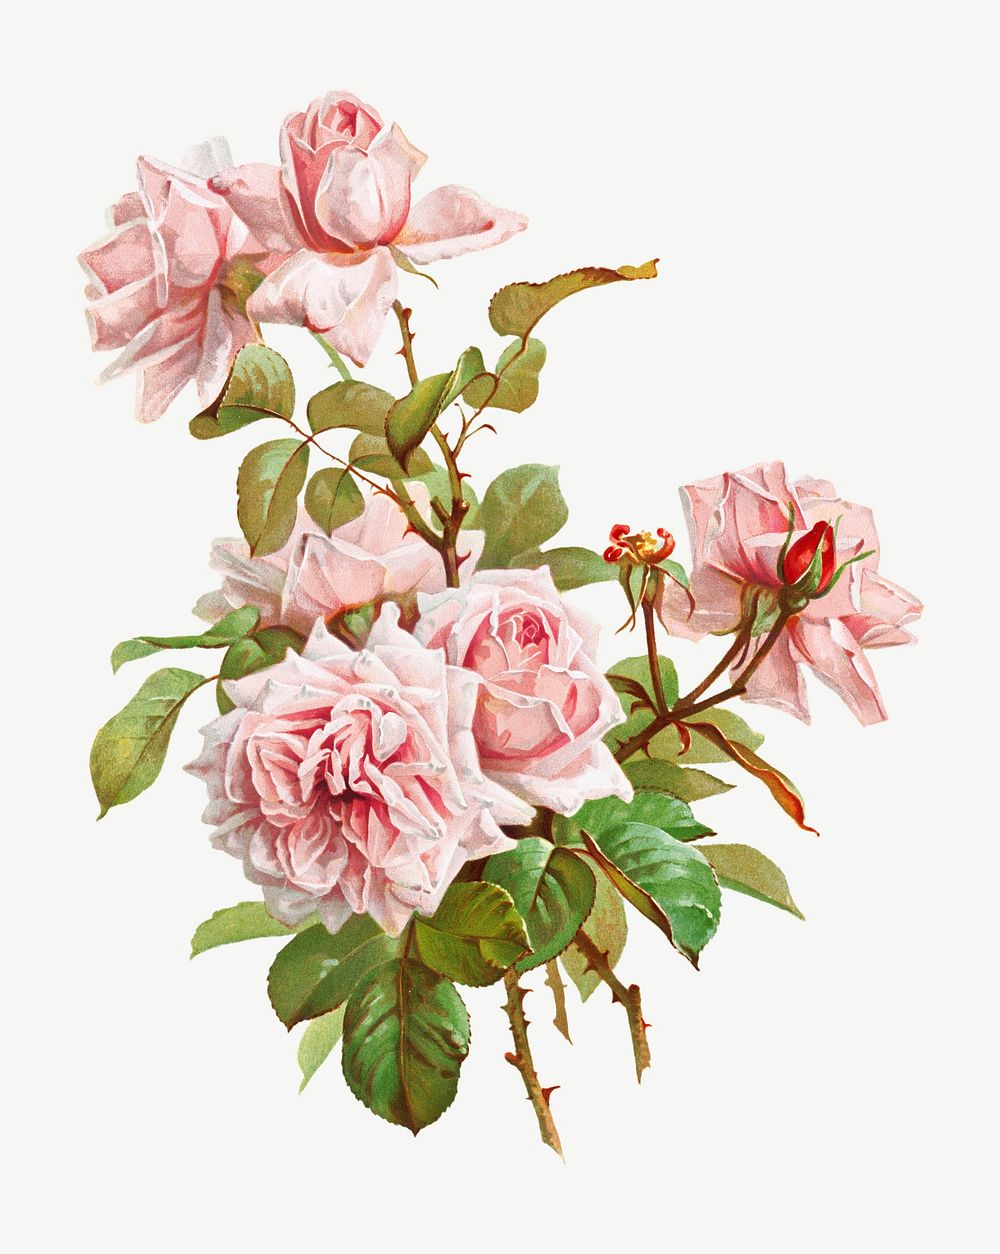 Pink roses; La France roses, vintage flower illustration by J. Bleischwitz psd. Remixed by rawpixel.